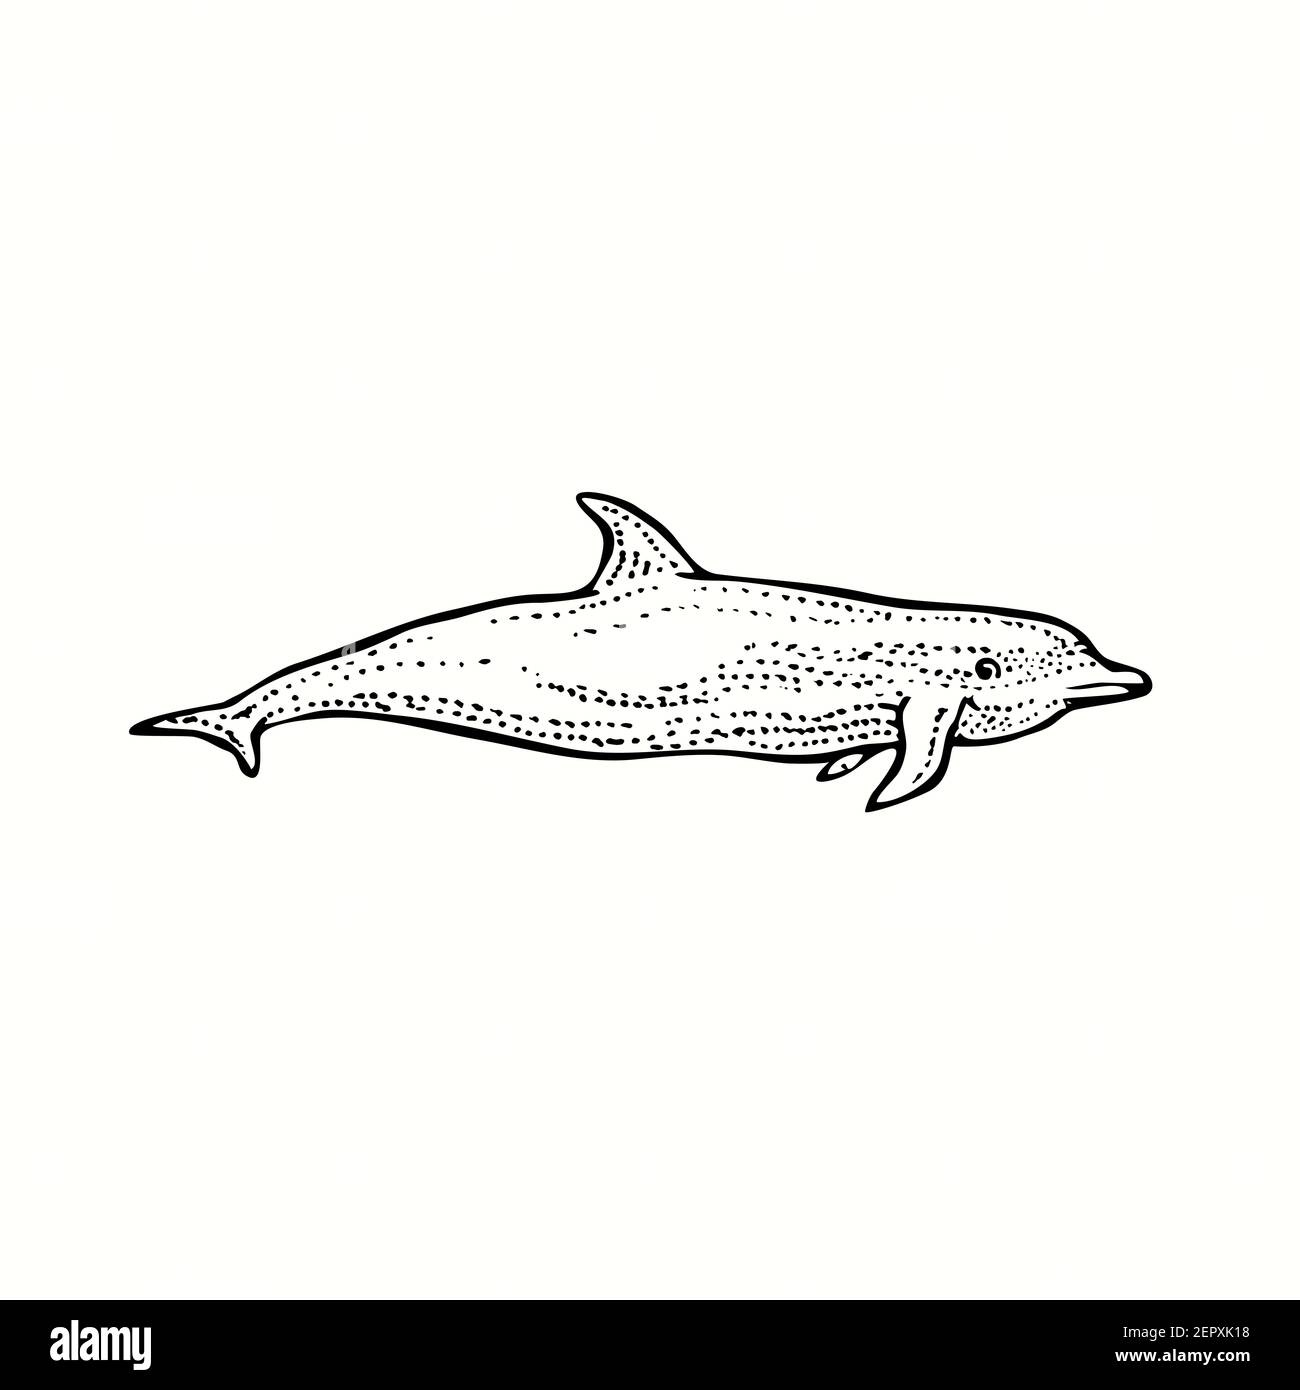 Bottlenose dolphin side view. Ink black and white doodle drawing in woodcut outline style. Stock Photo